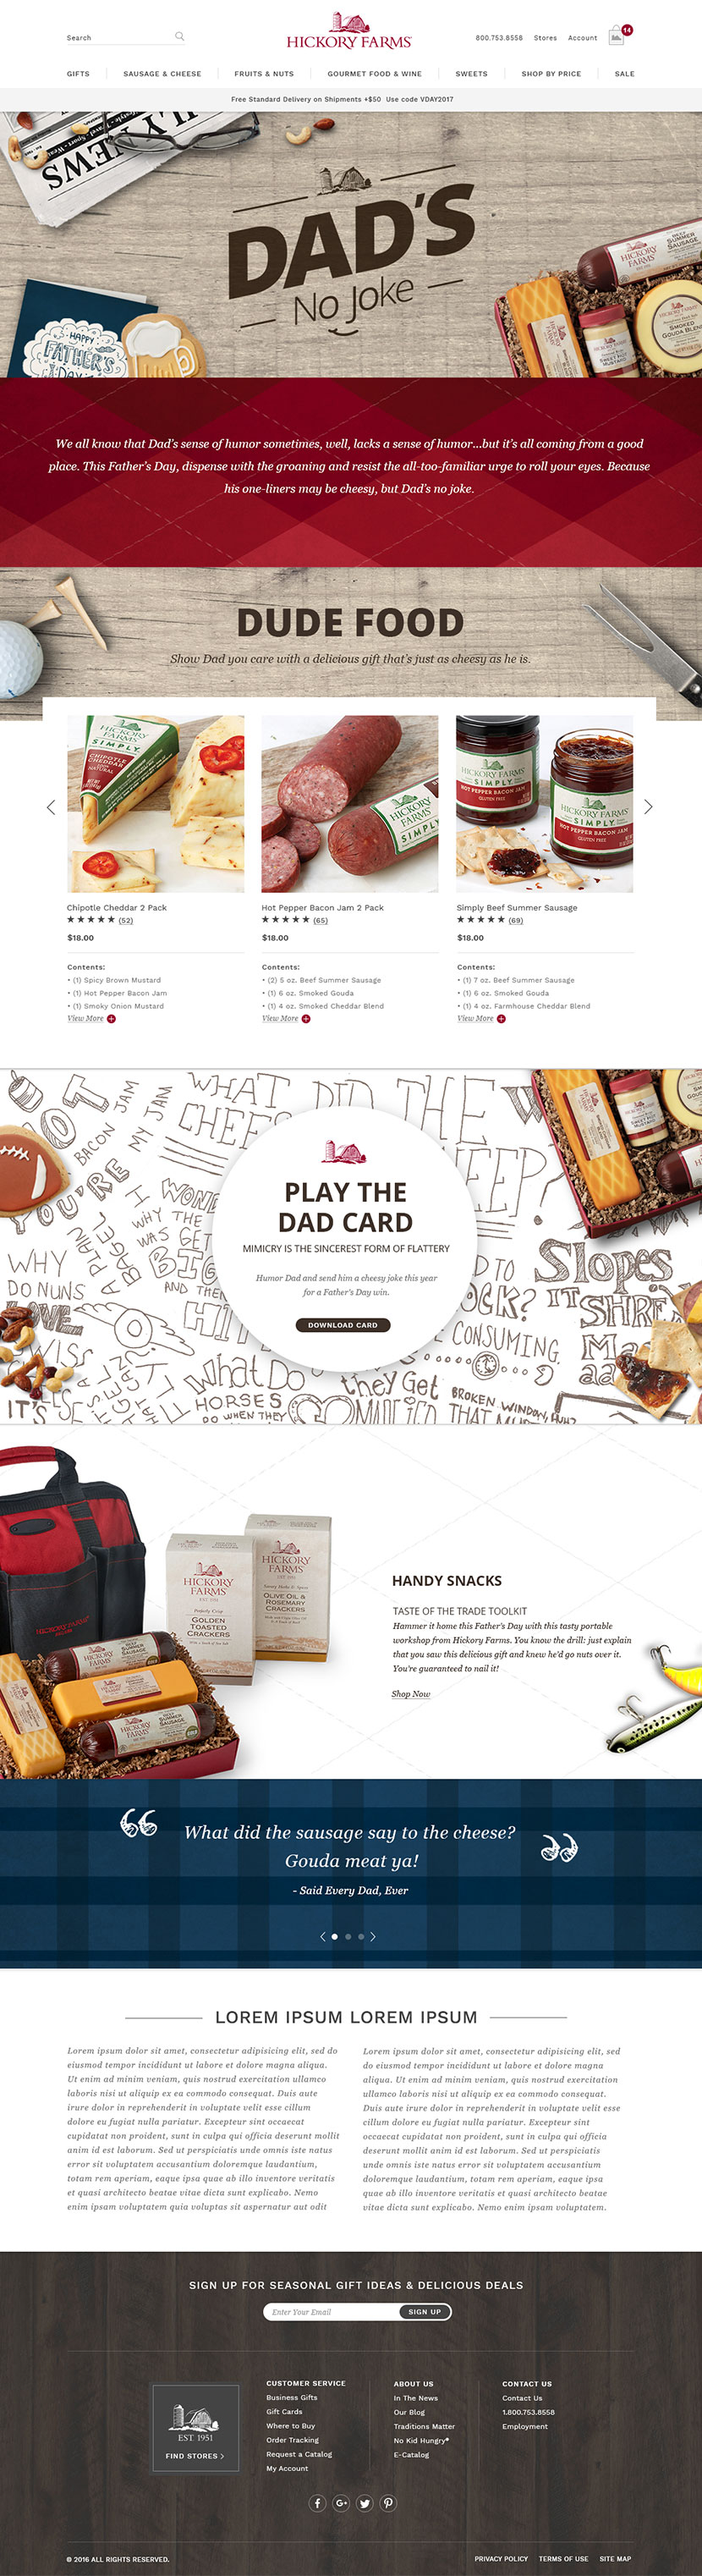 Hickory Farms Father's Day campaign landing page